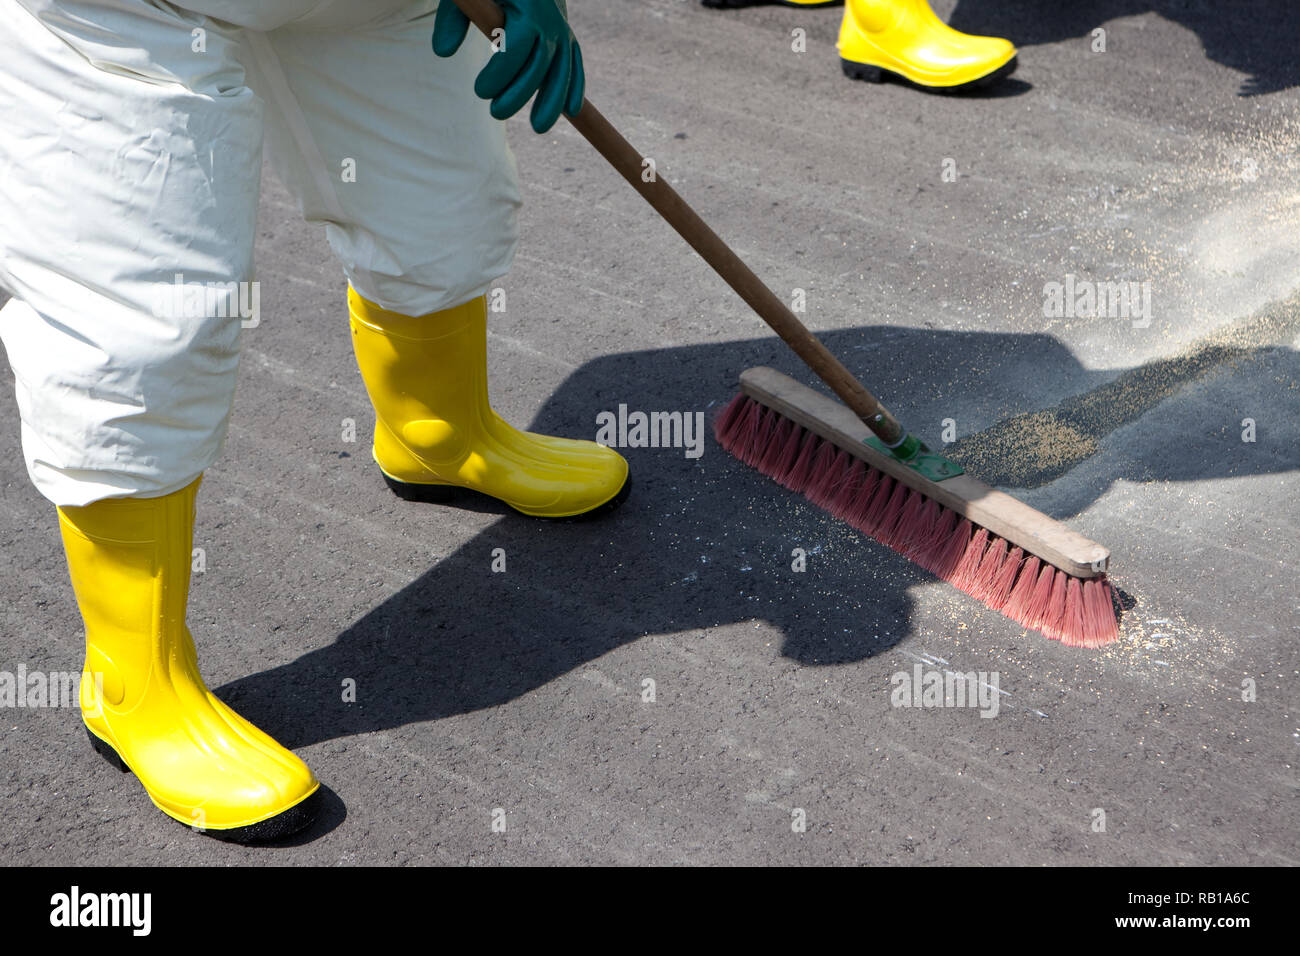 Men in protective gear cleaning up after chemical accident. The inflatable gear also protects against contamination with radioactive particles, agains Stock Photo